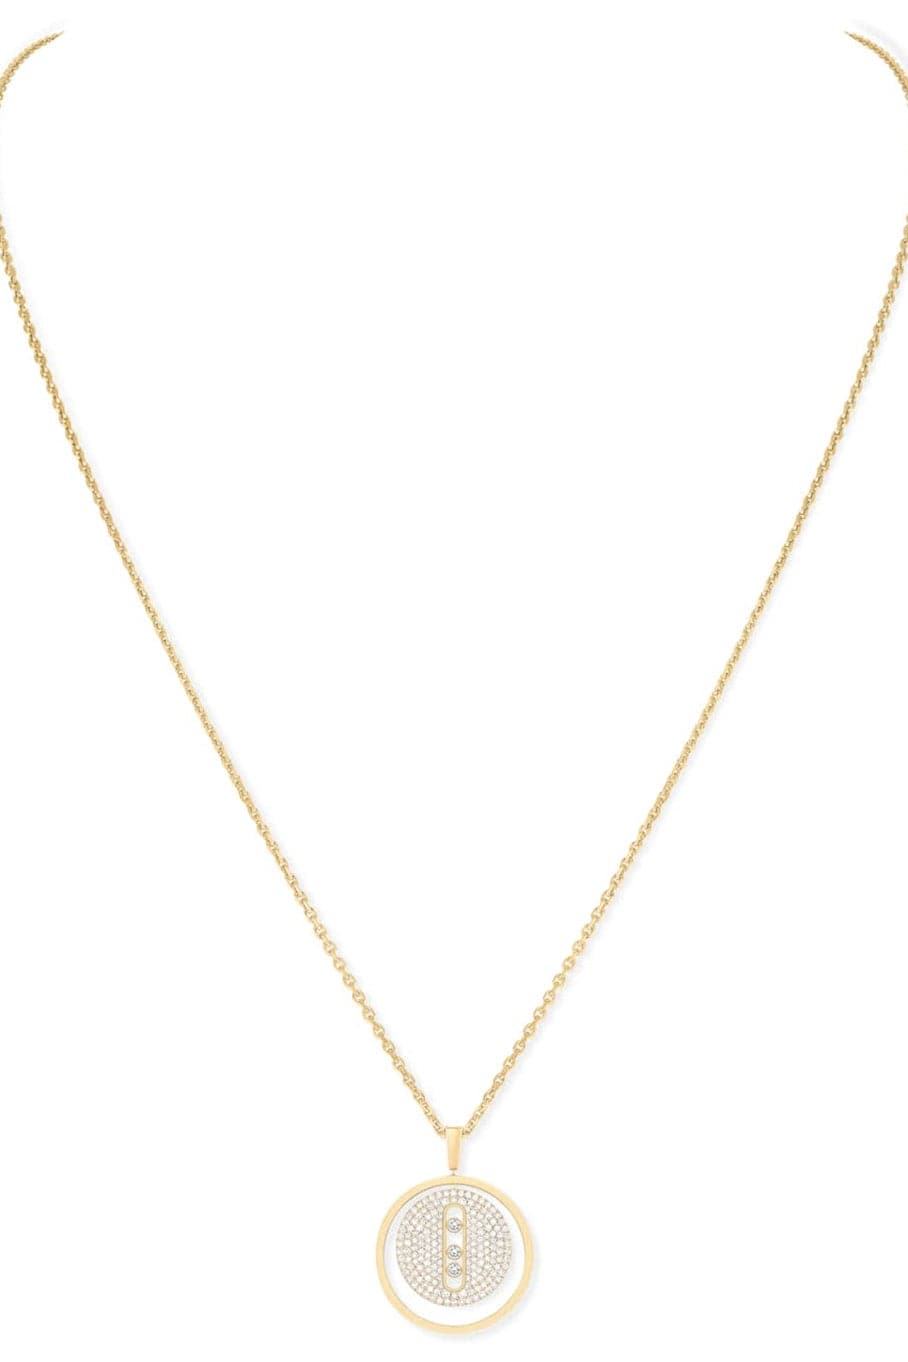 MESSIKA-Lucky Move Diamond Necklace-YELLOW GOLD